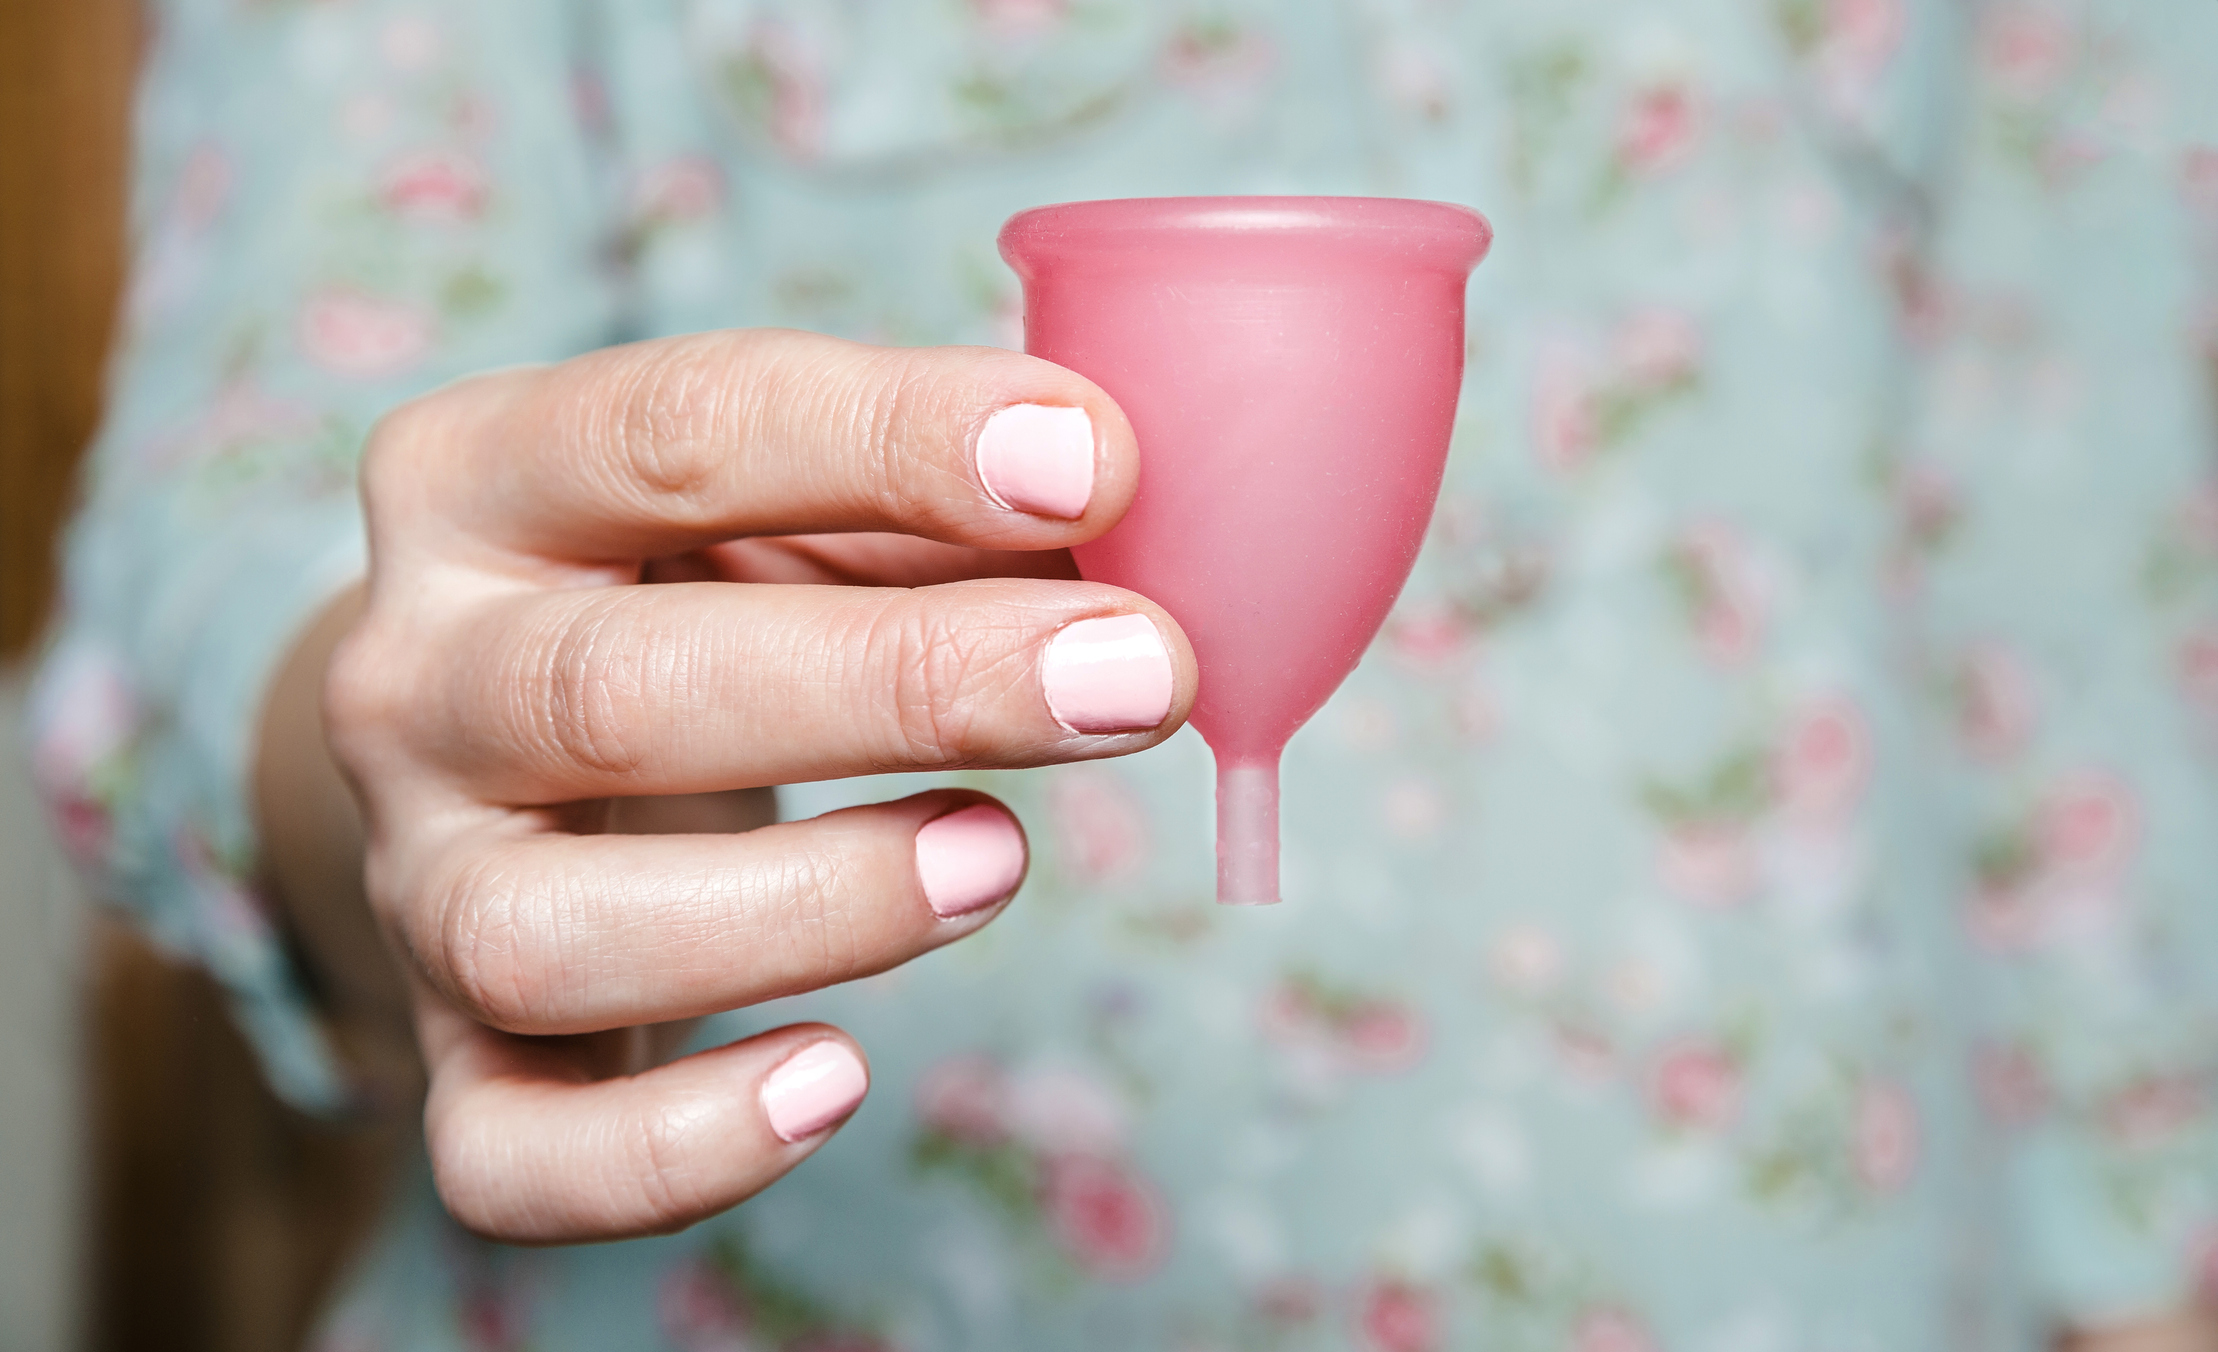 What are the differences between menstrual cups and tampons